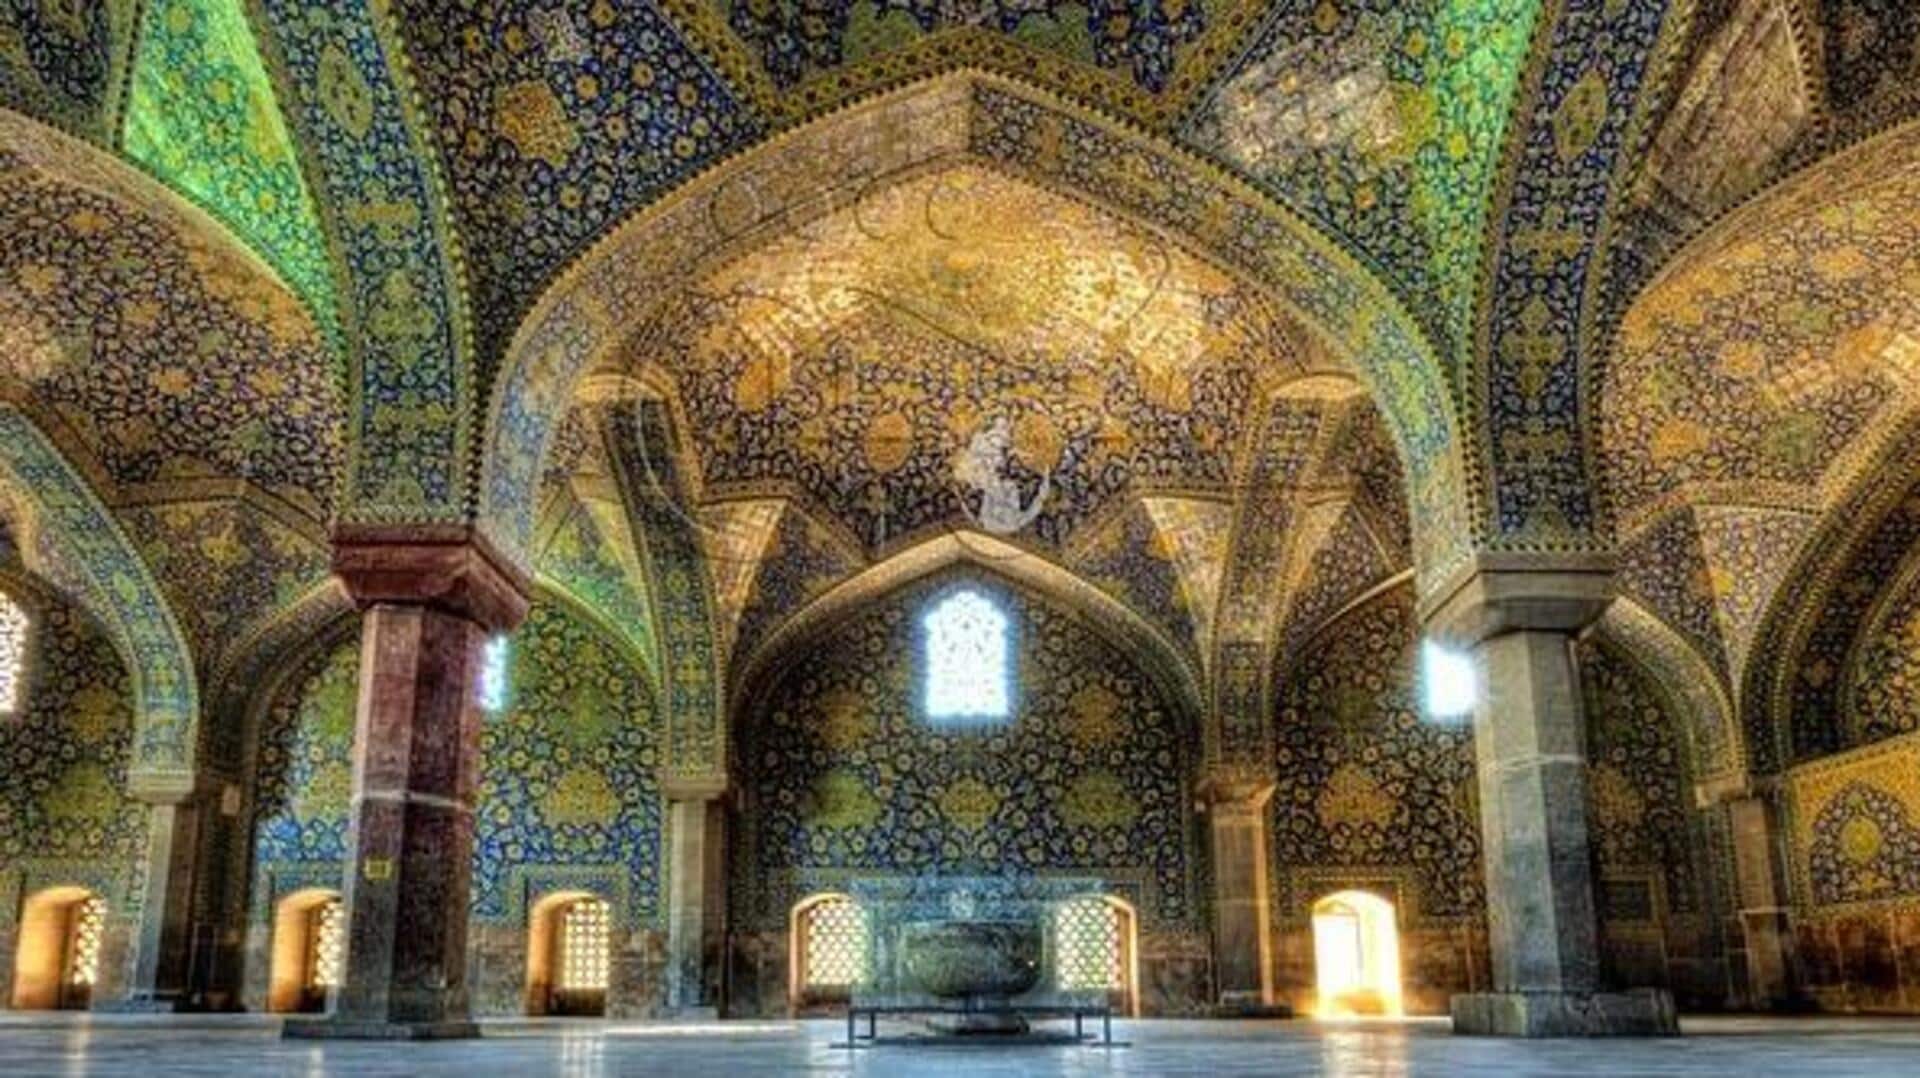 Take a journey through architectural wonders in Isfahan, Iran